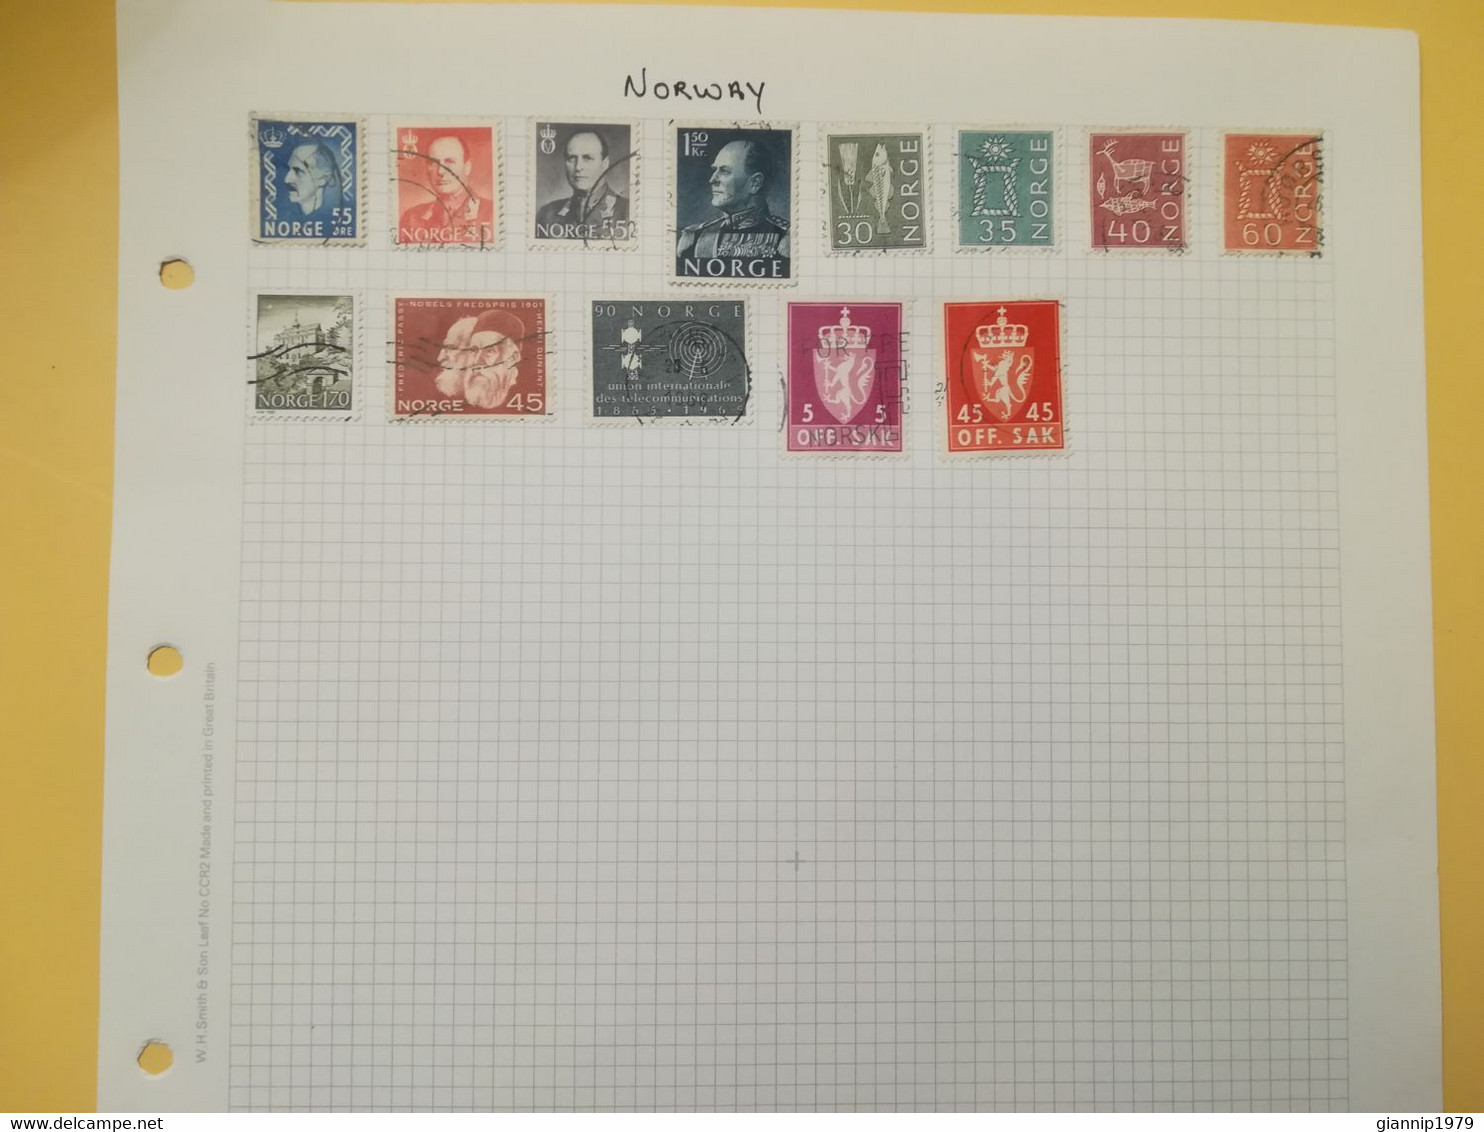 PAGINA PAGE ALBUM NORVEGIA NORGE NORWAY 1951 ATTACCATI PAGE WITH STAMPS COLLEZIONI LOTTO LOT LOTS - Sammlungen